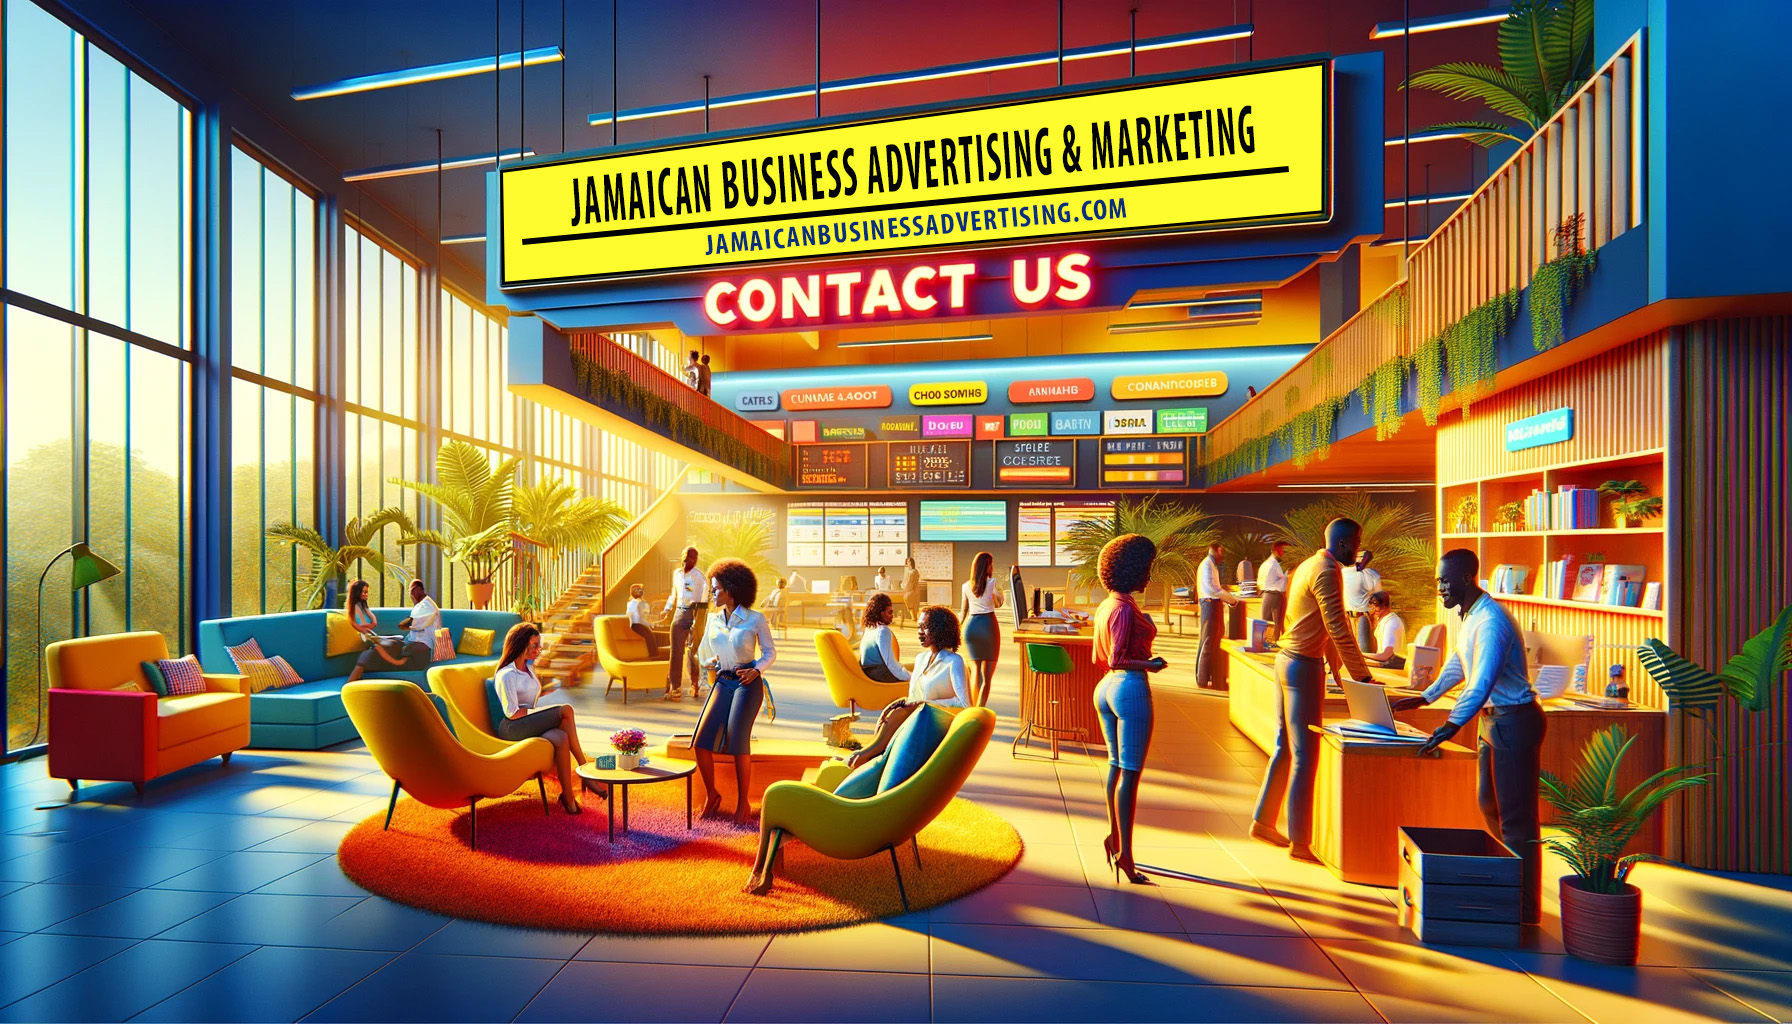 Contact Us - Jamaican Business Advertising & Marketing - JamaicanBusinessAdvertising.com